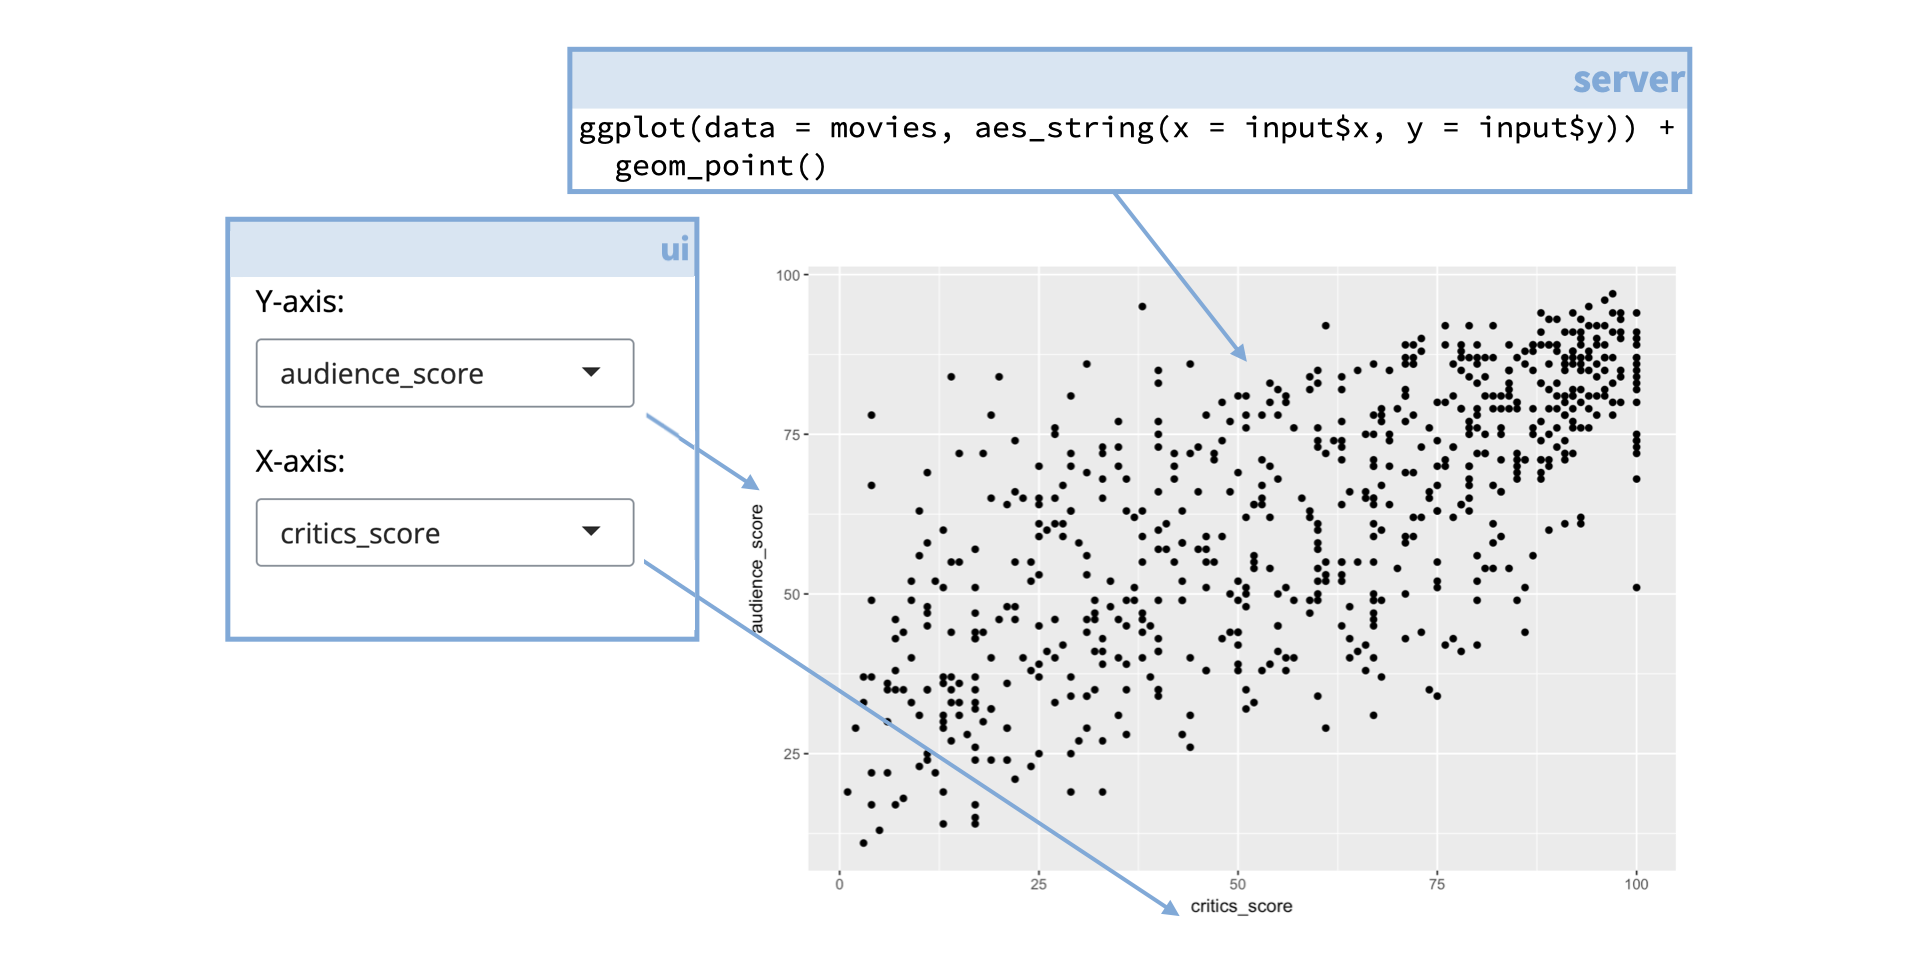 Highlighting areas of the Shiny app. Shows the Y-axis box pointing to the y-axis on the plot and the X-axis box pointing to the x-axis on the plot. Code 'ggplot(data = movies, aes_string(x = input$x, y = input$y)) + geom_point()' points to the points on the scatterplot.